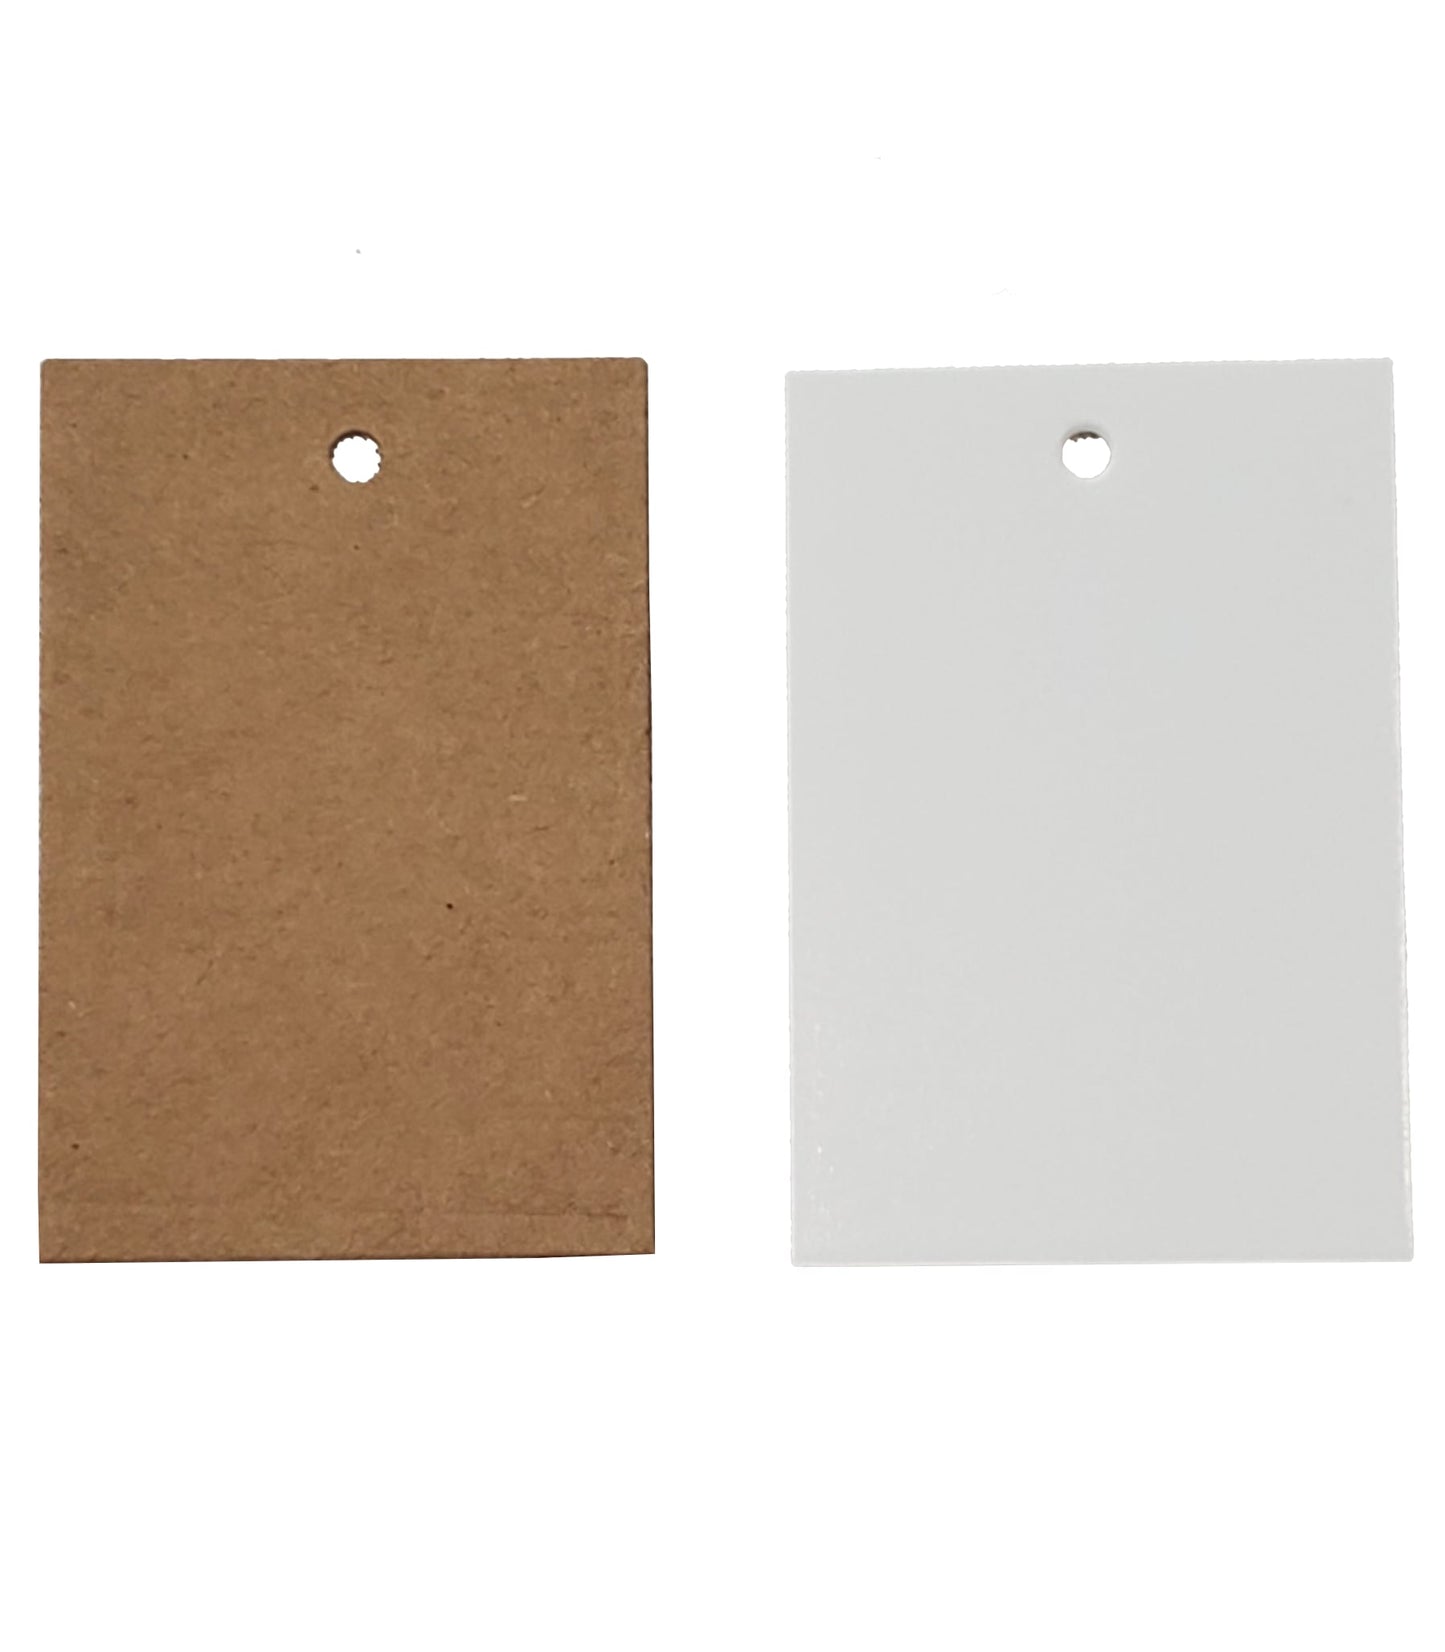 Unstrung Plain Tags - Small